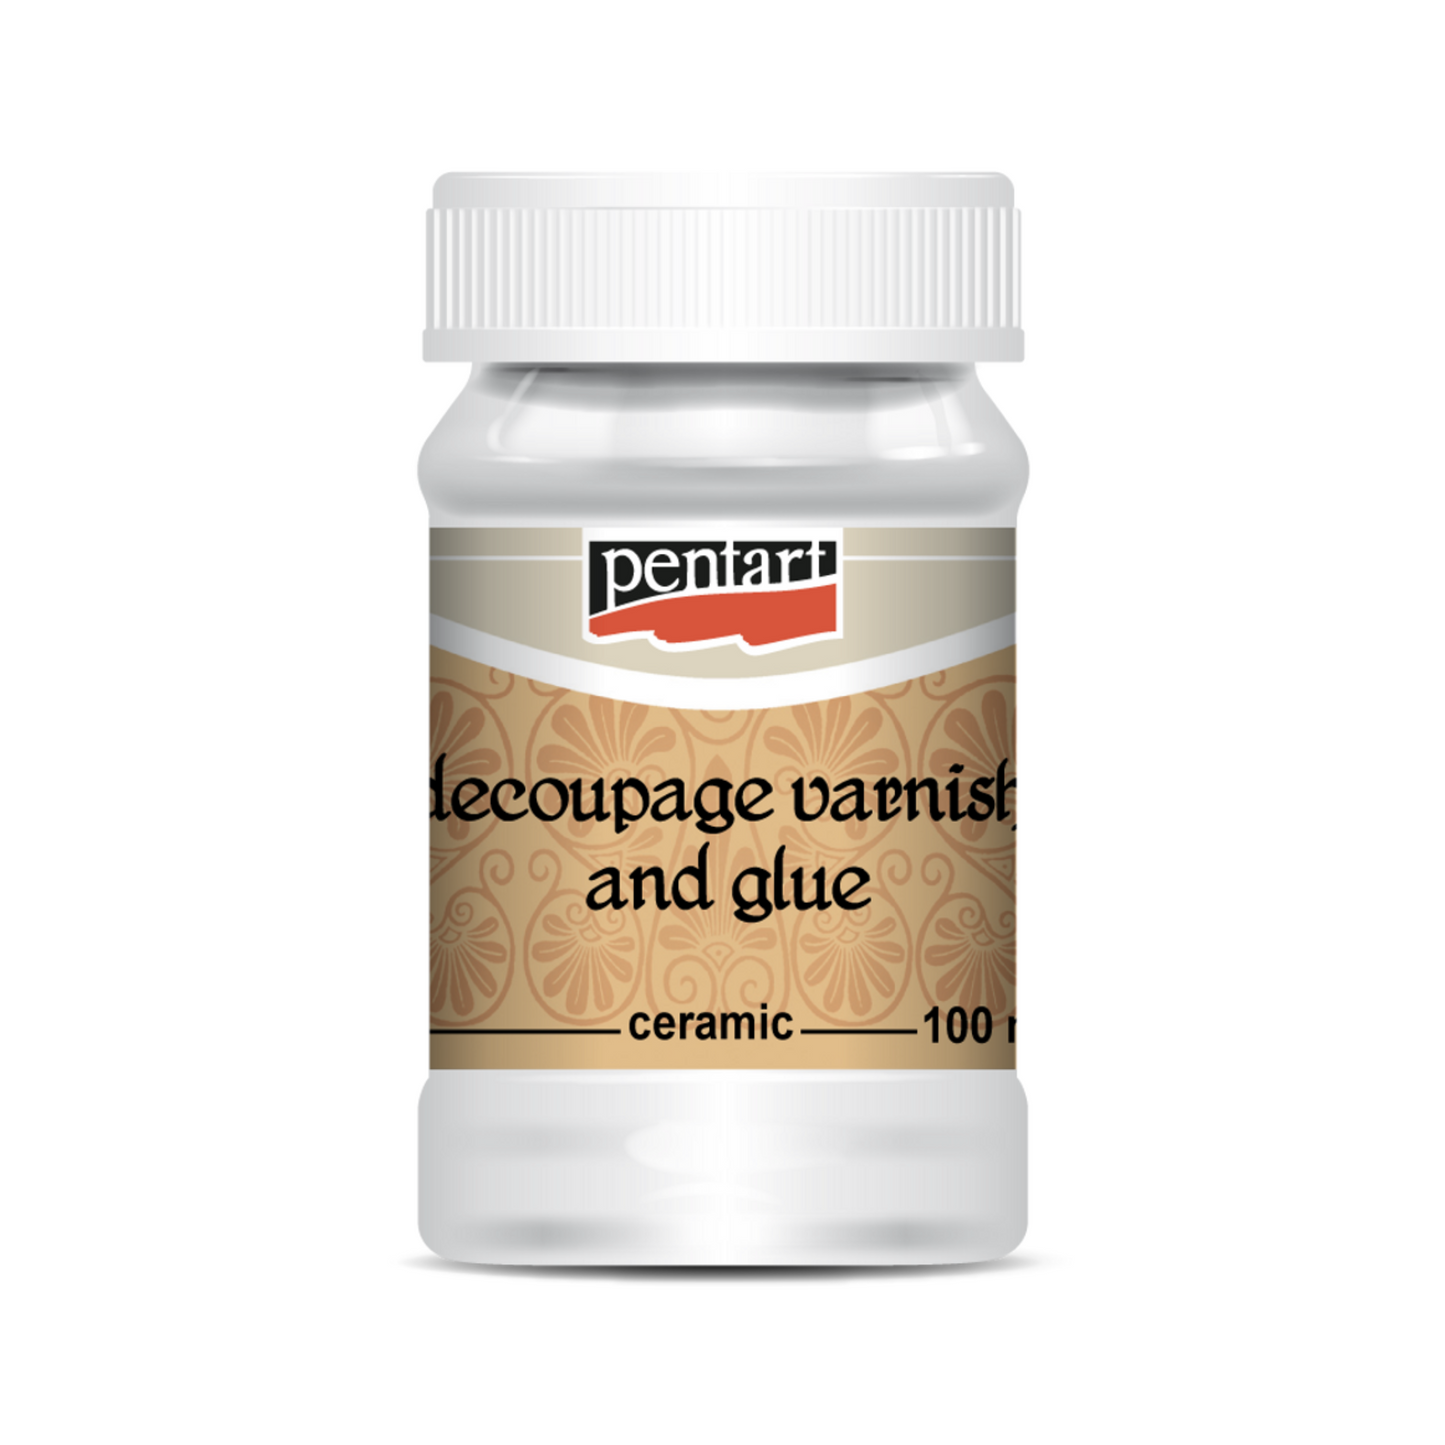 Decoupage Varnish and Glue for Ceramic by Pentart. Available at Milton's Daughter.